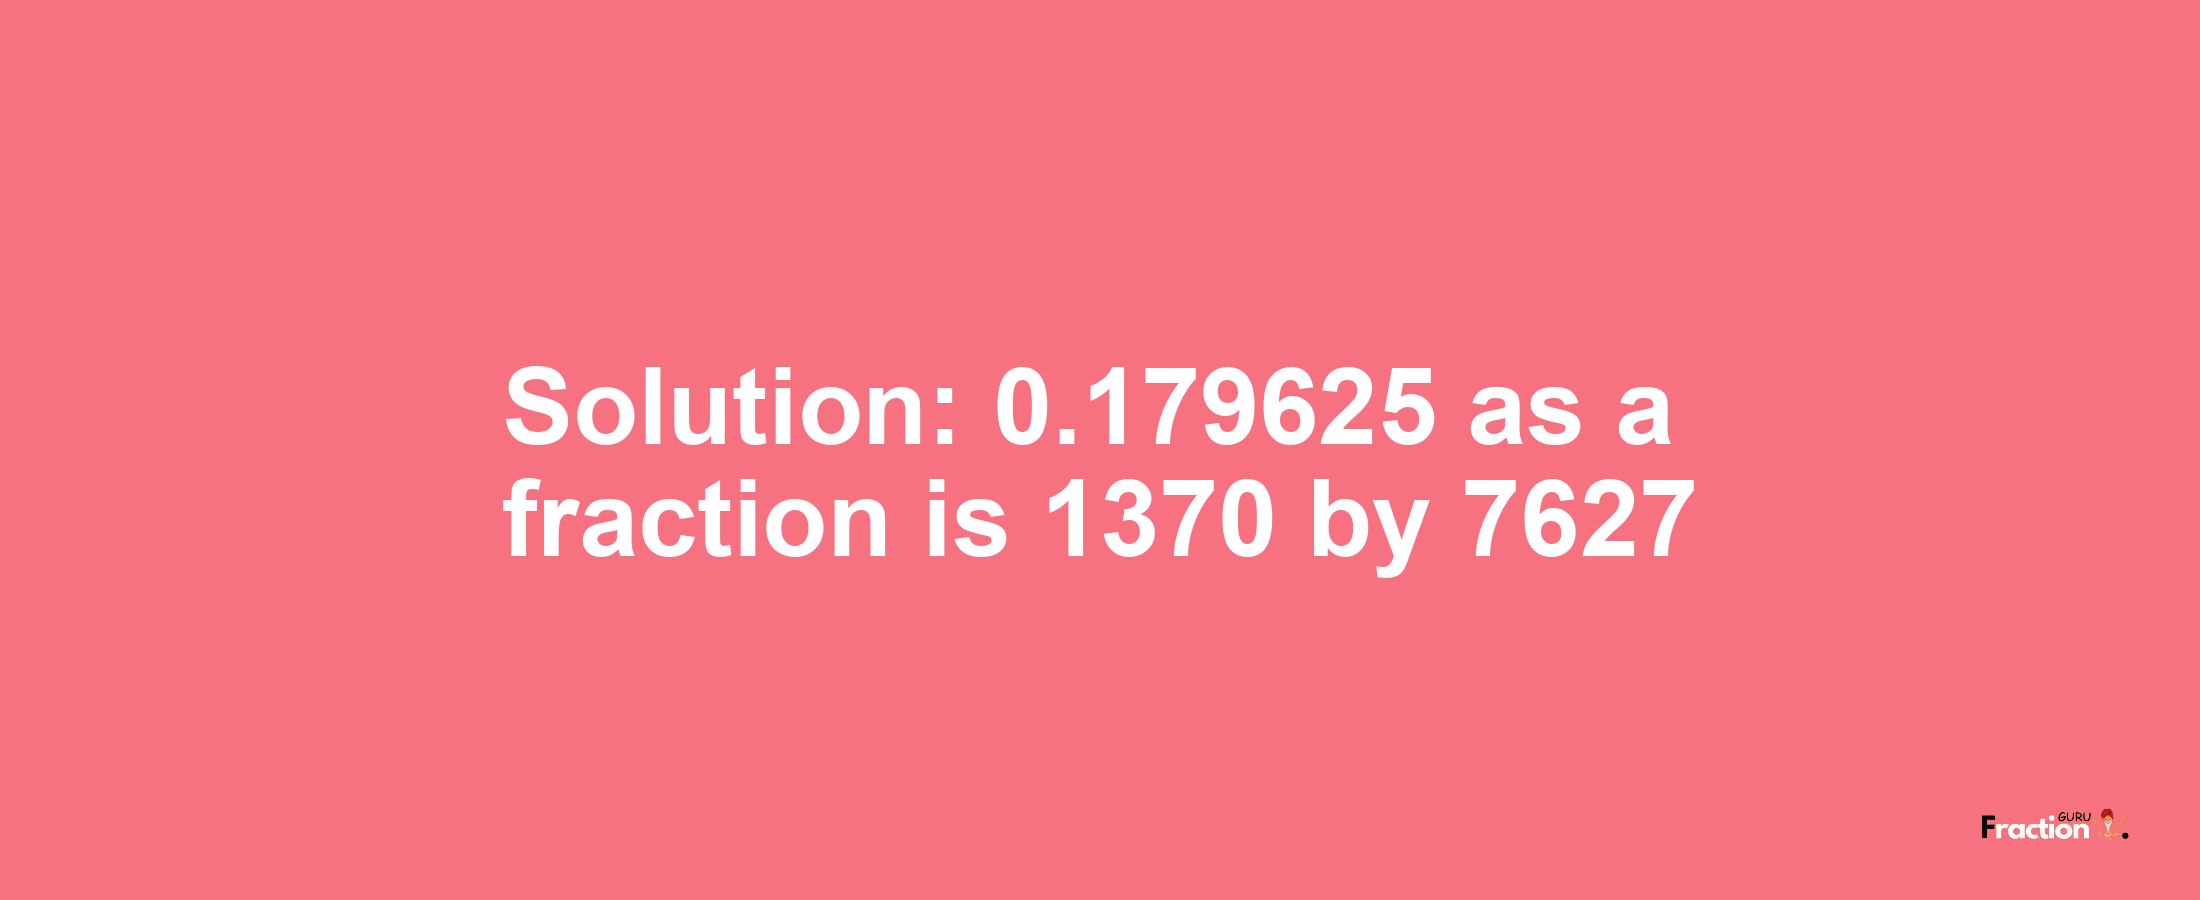 Solution:0.179625 as a fraction is 1370/7627